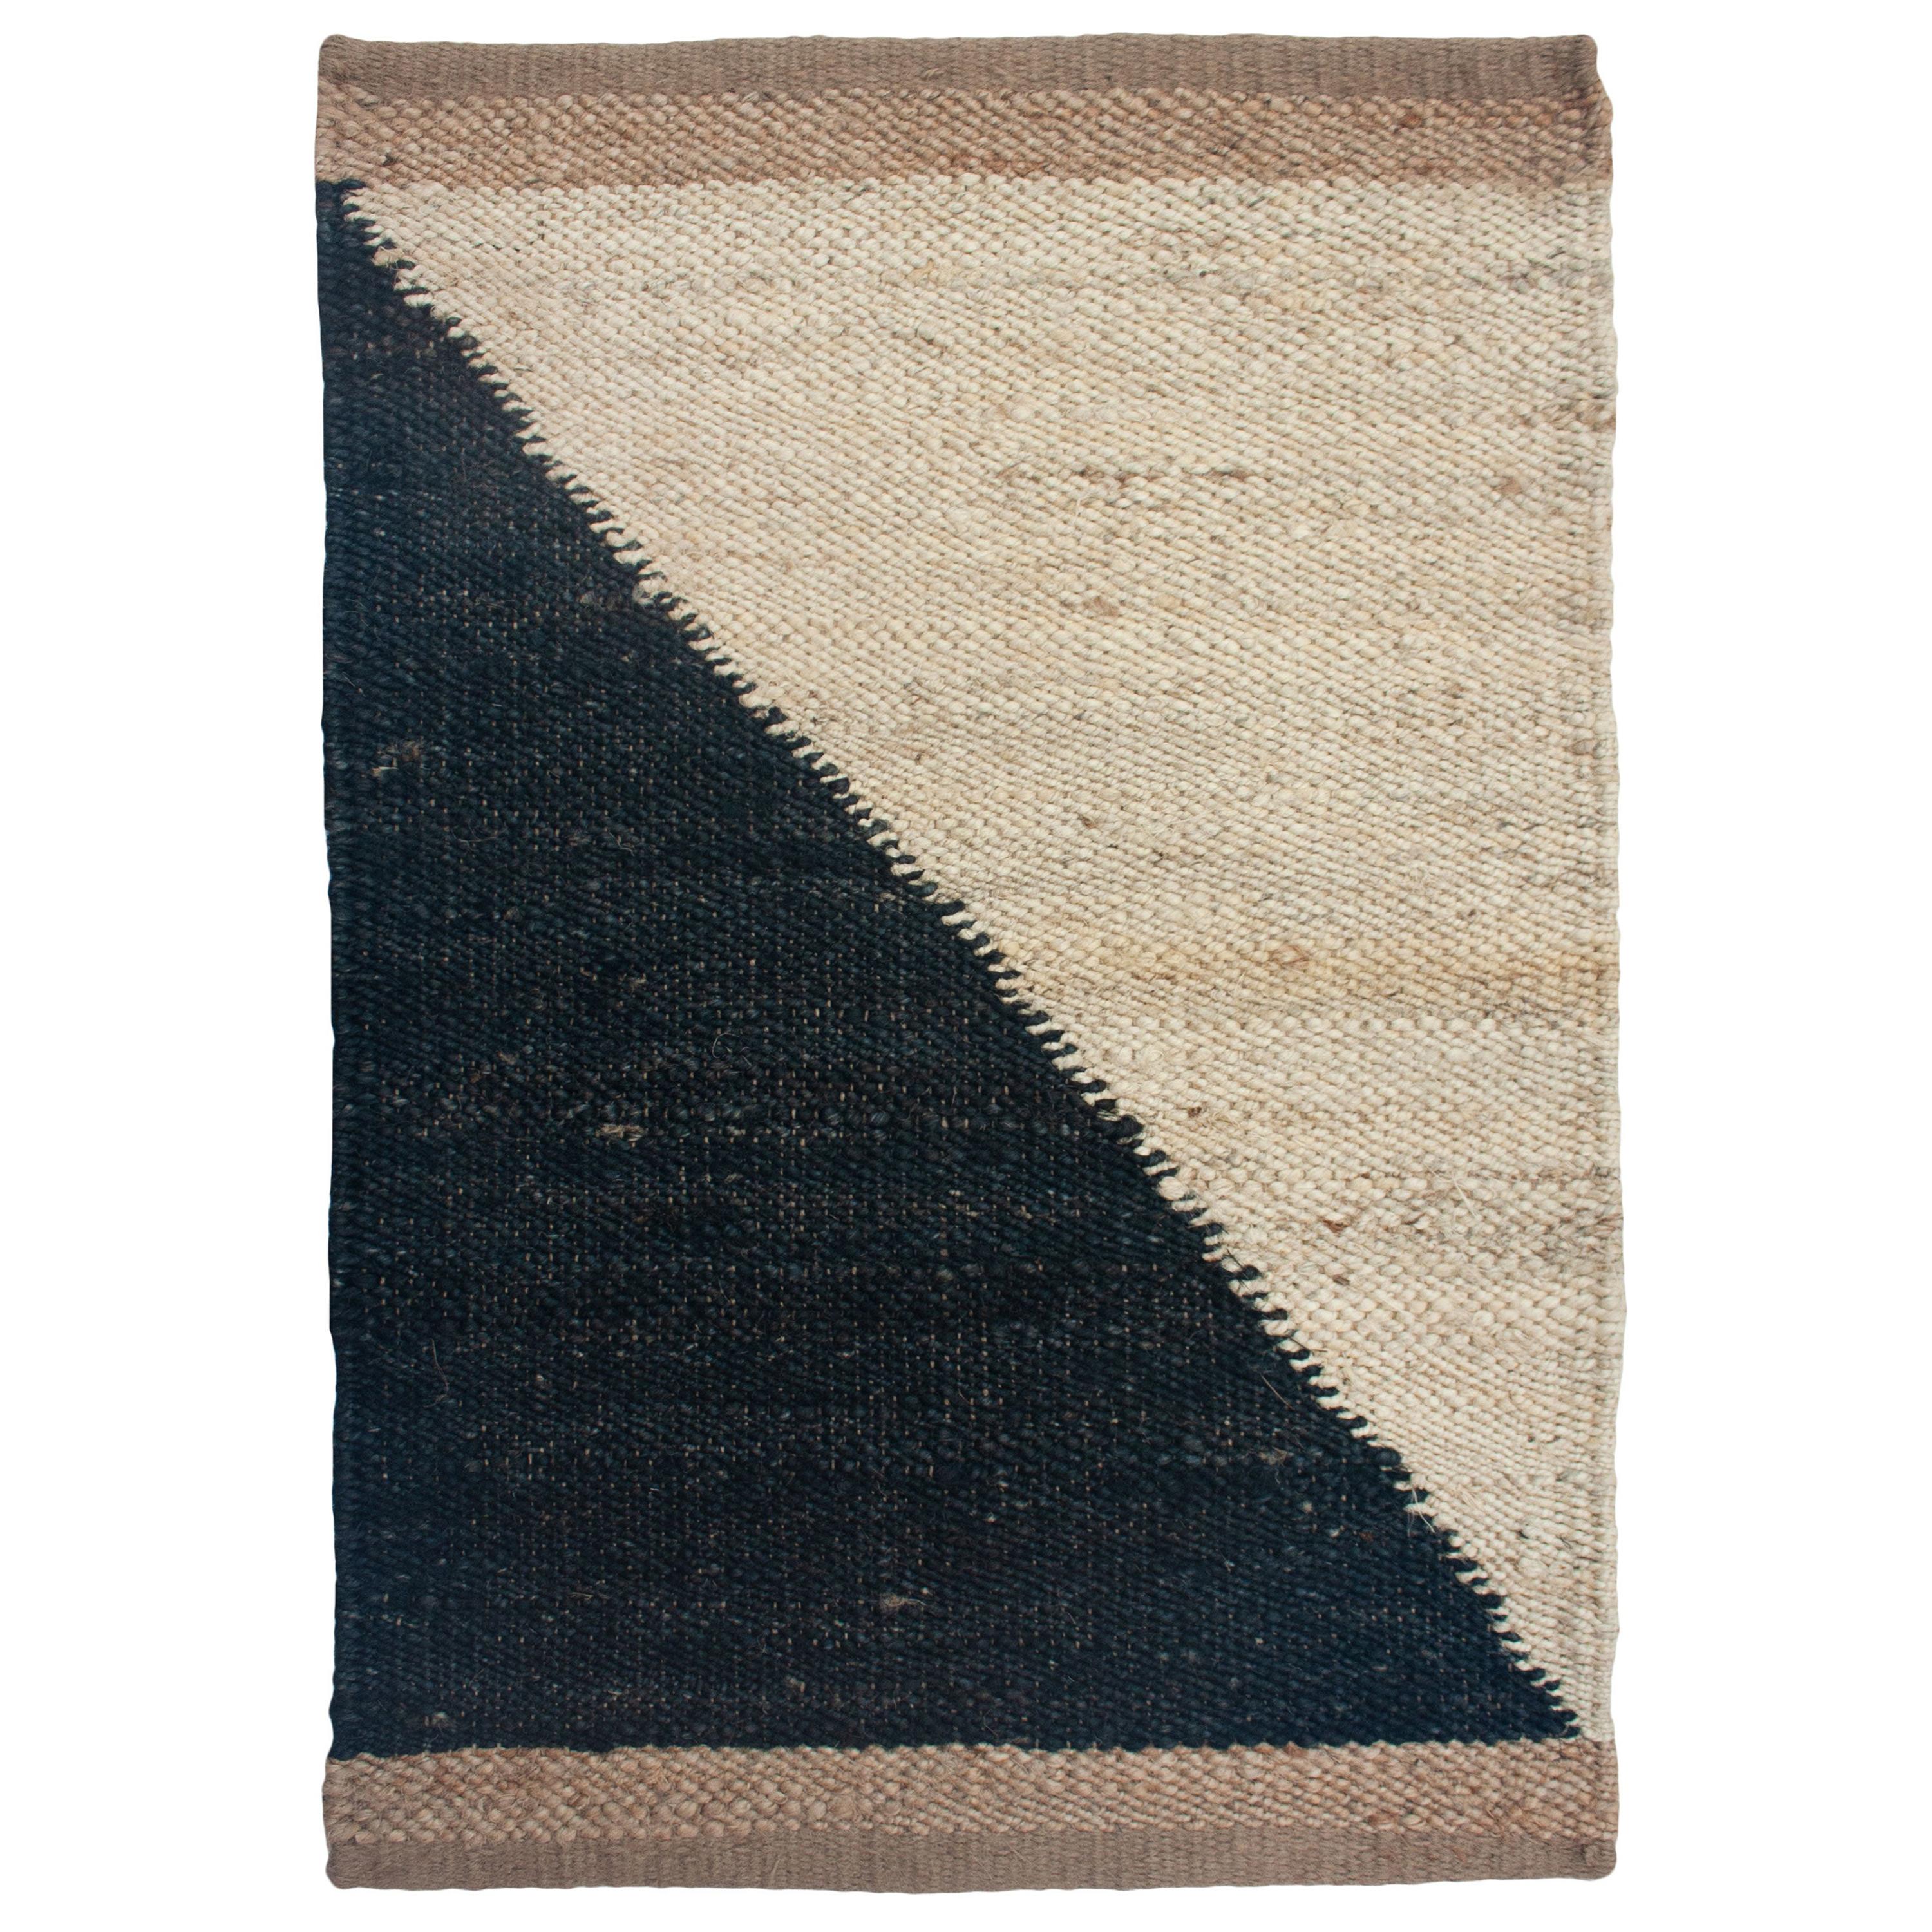 Margeaux Black and White Geometric Handwoven Modern Jute Rug, Carpet and Durrie